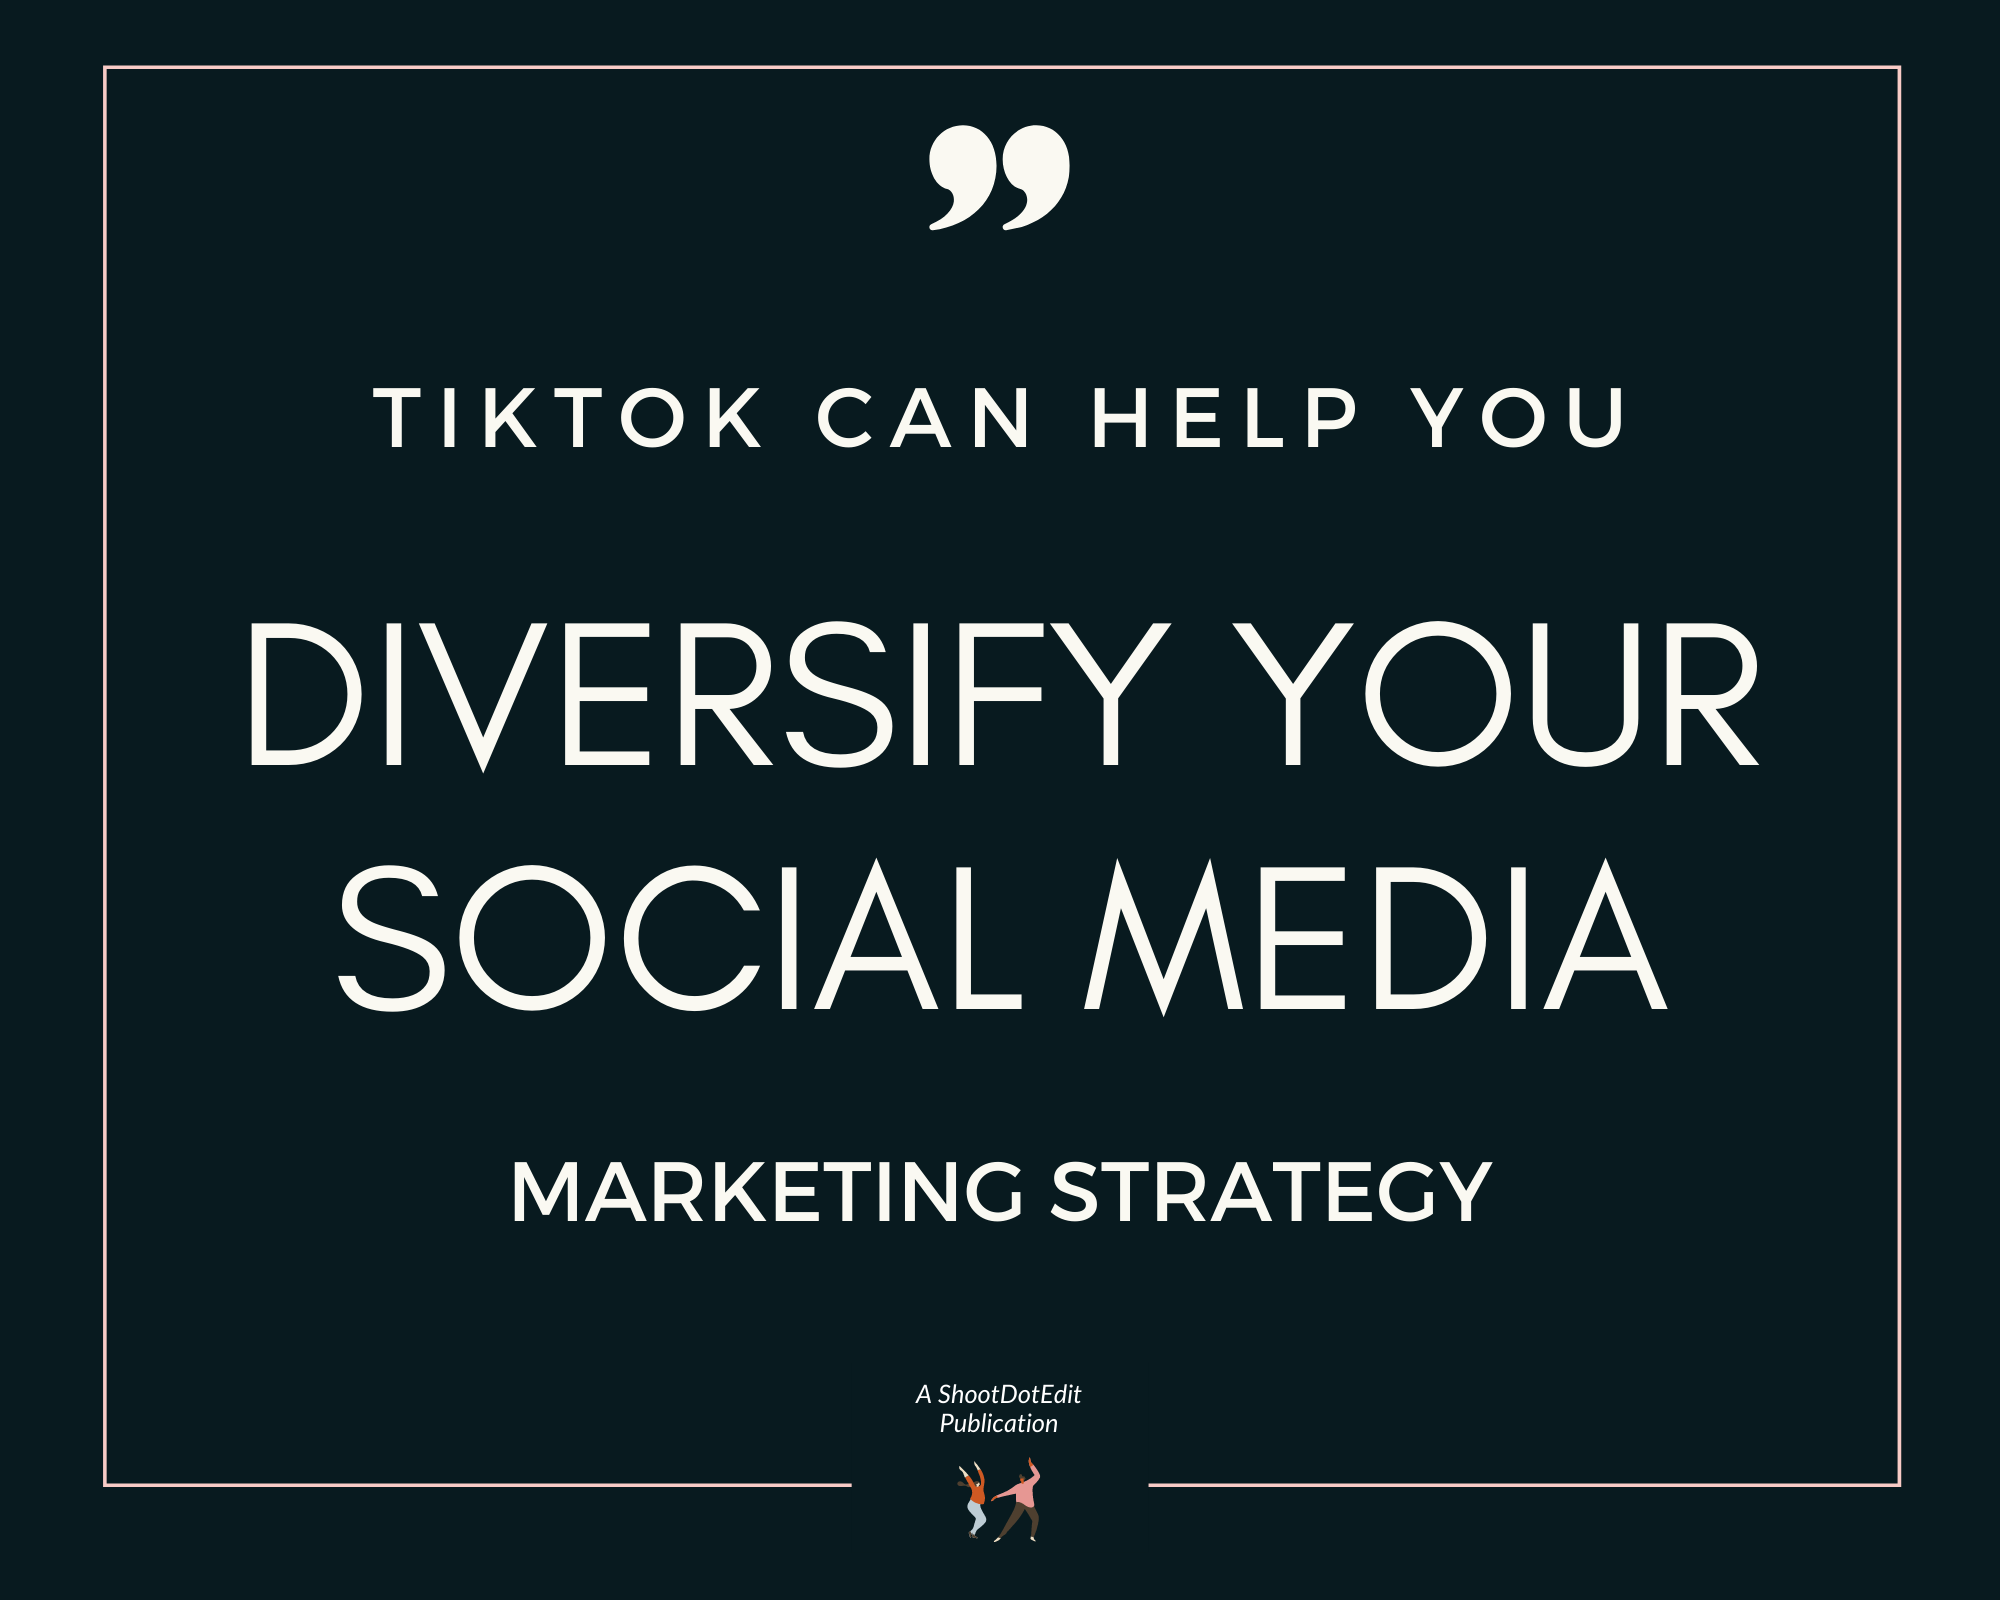 Infographic stating TikTok can help you diversify your social media marketing strategy